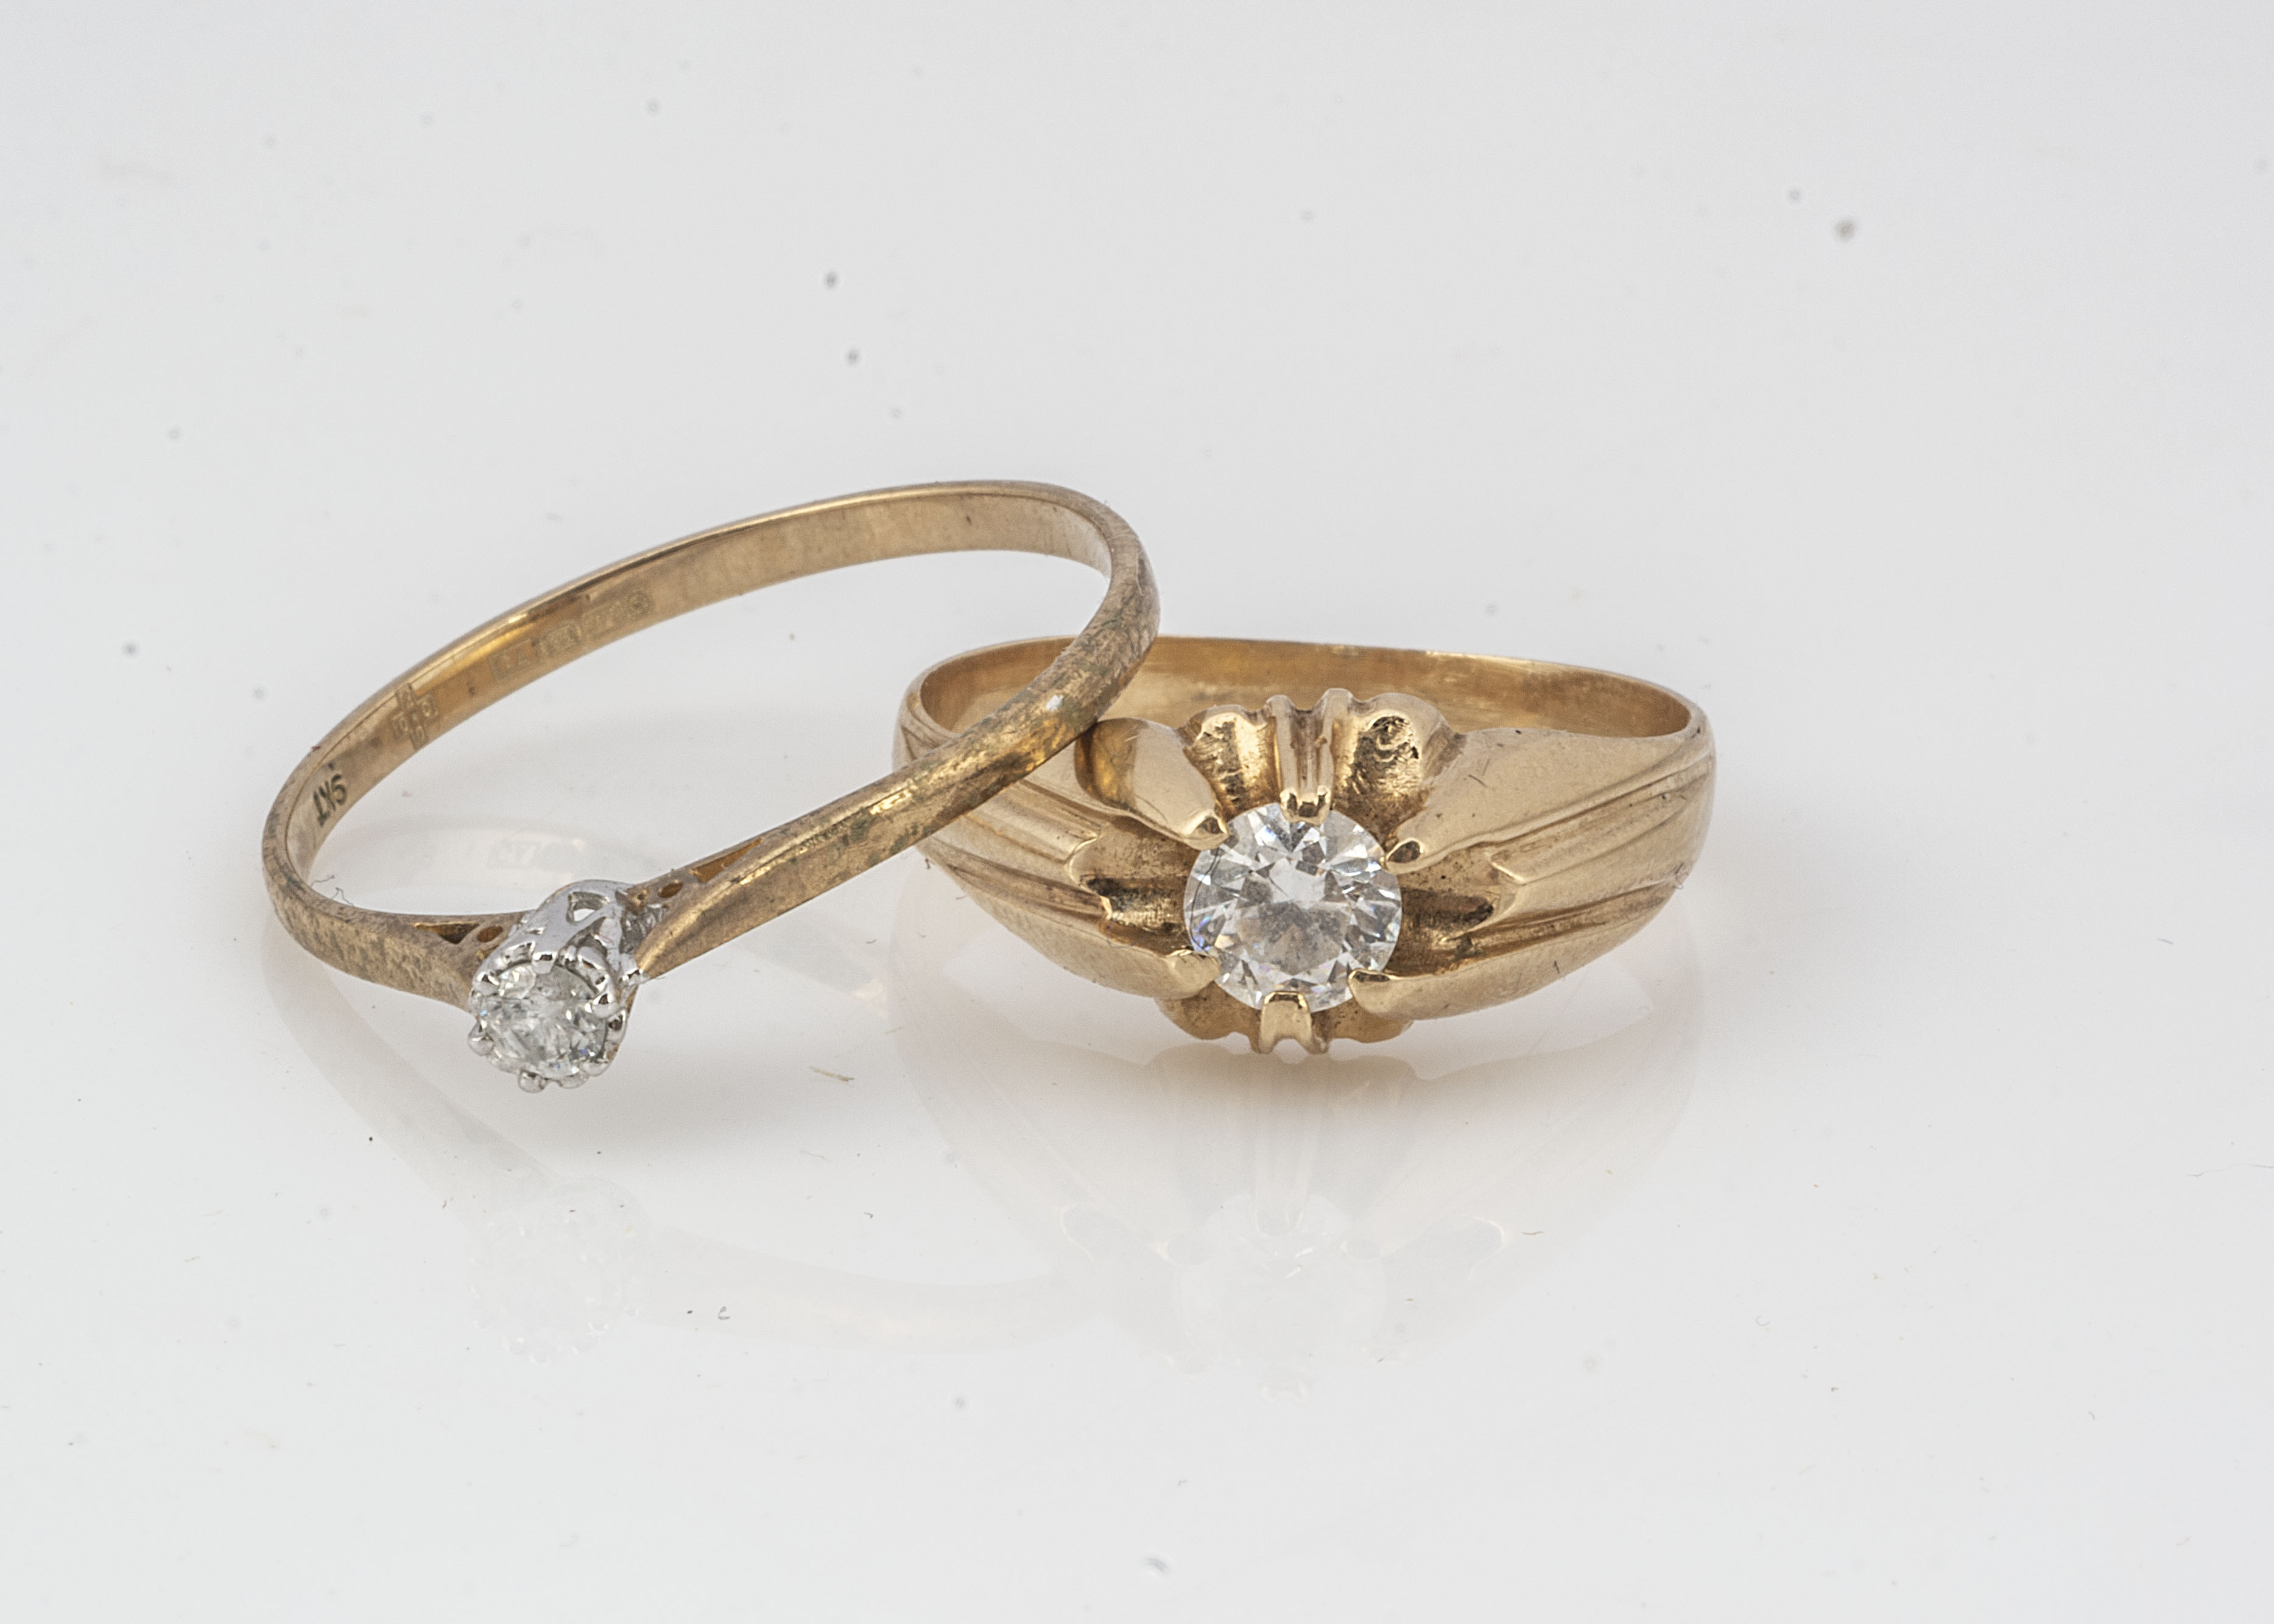 Two 9ct gold dress rings, including a paste set example, ring size R and a diamond solitaire, ring